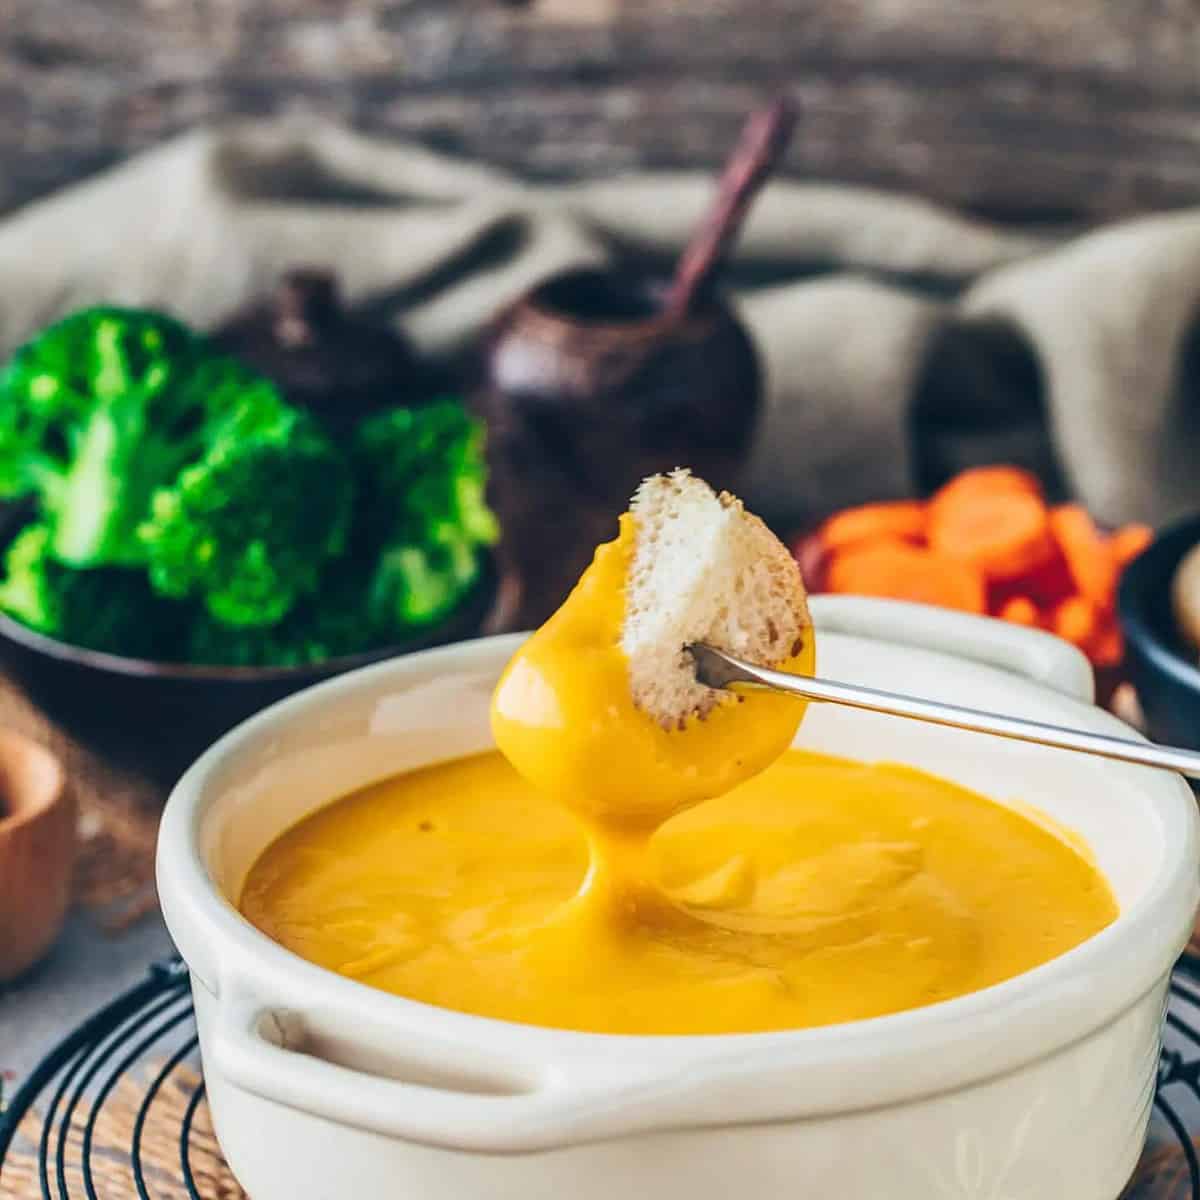  With a simple ingredient list, this Vegan Cheese Fondue is easy to whip up and enjoy.